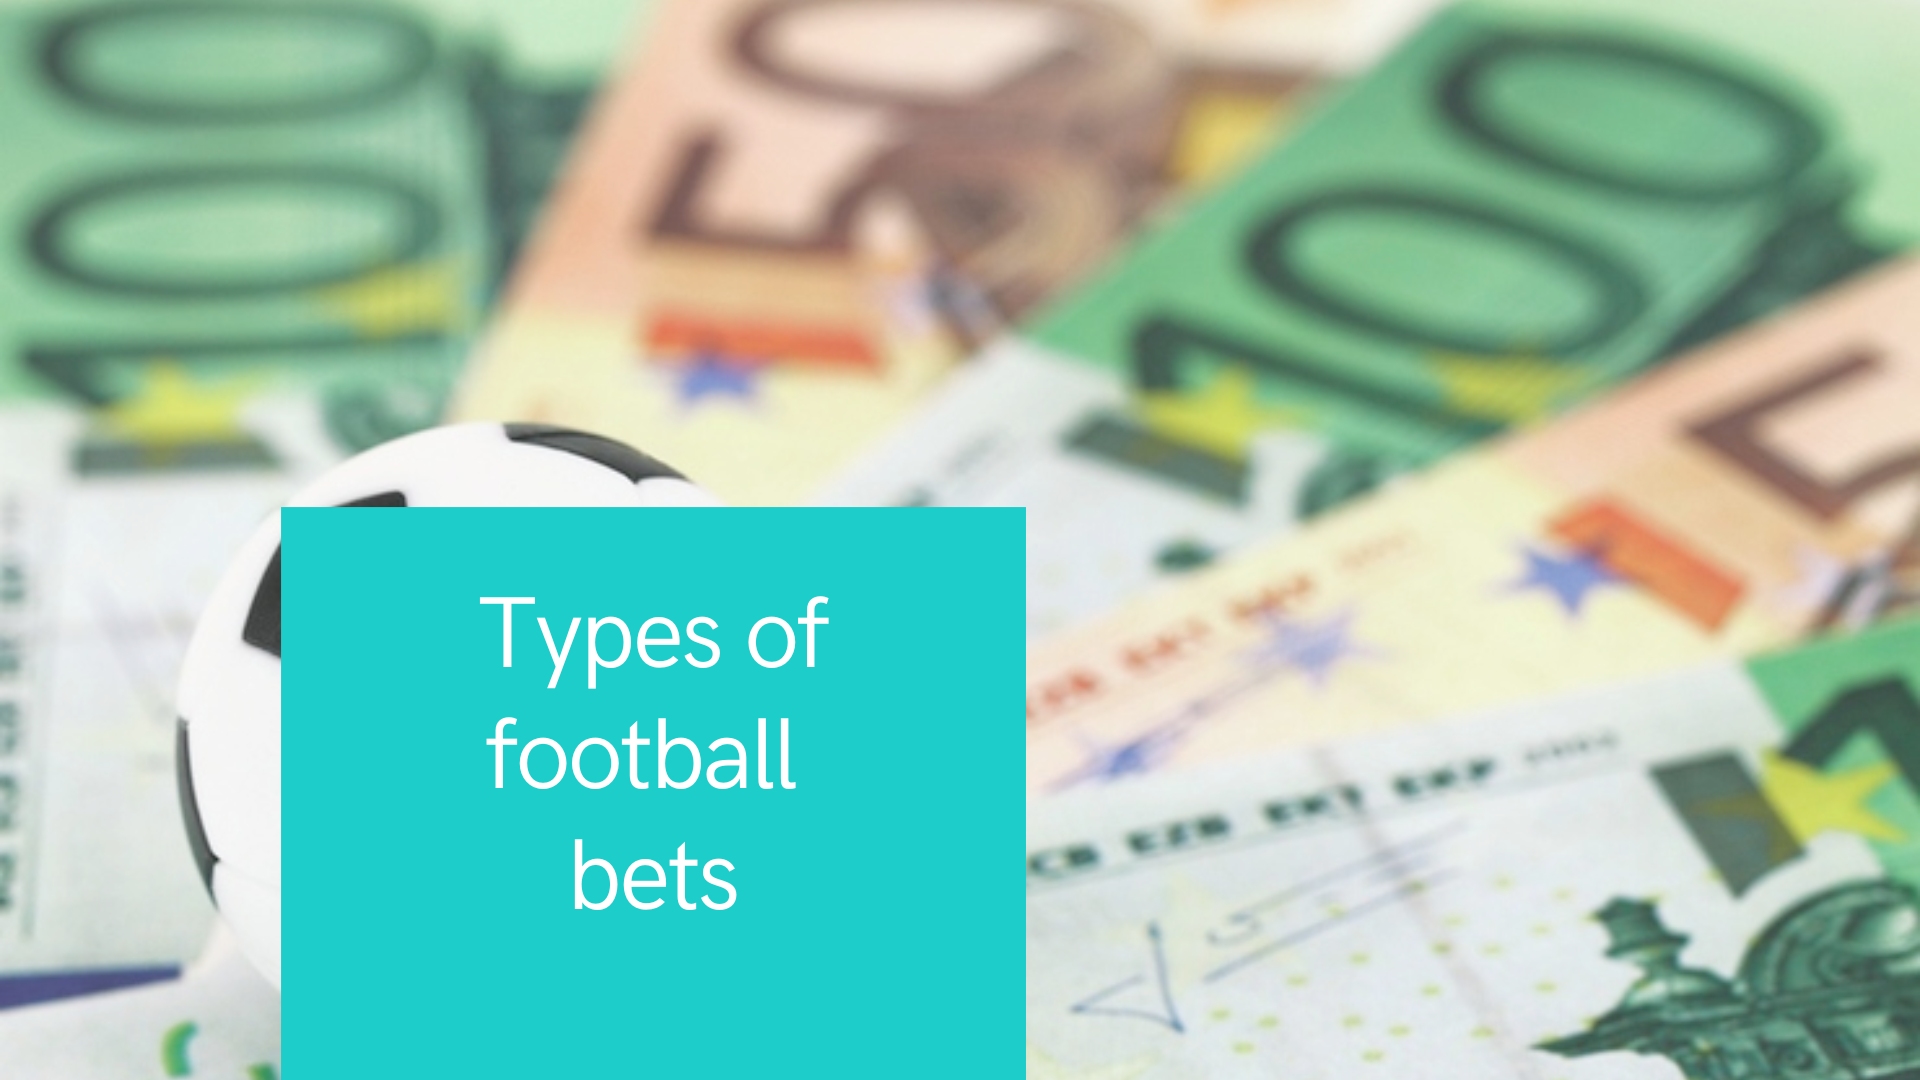 Types of bets to make on football matches